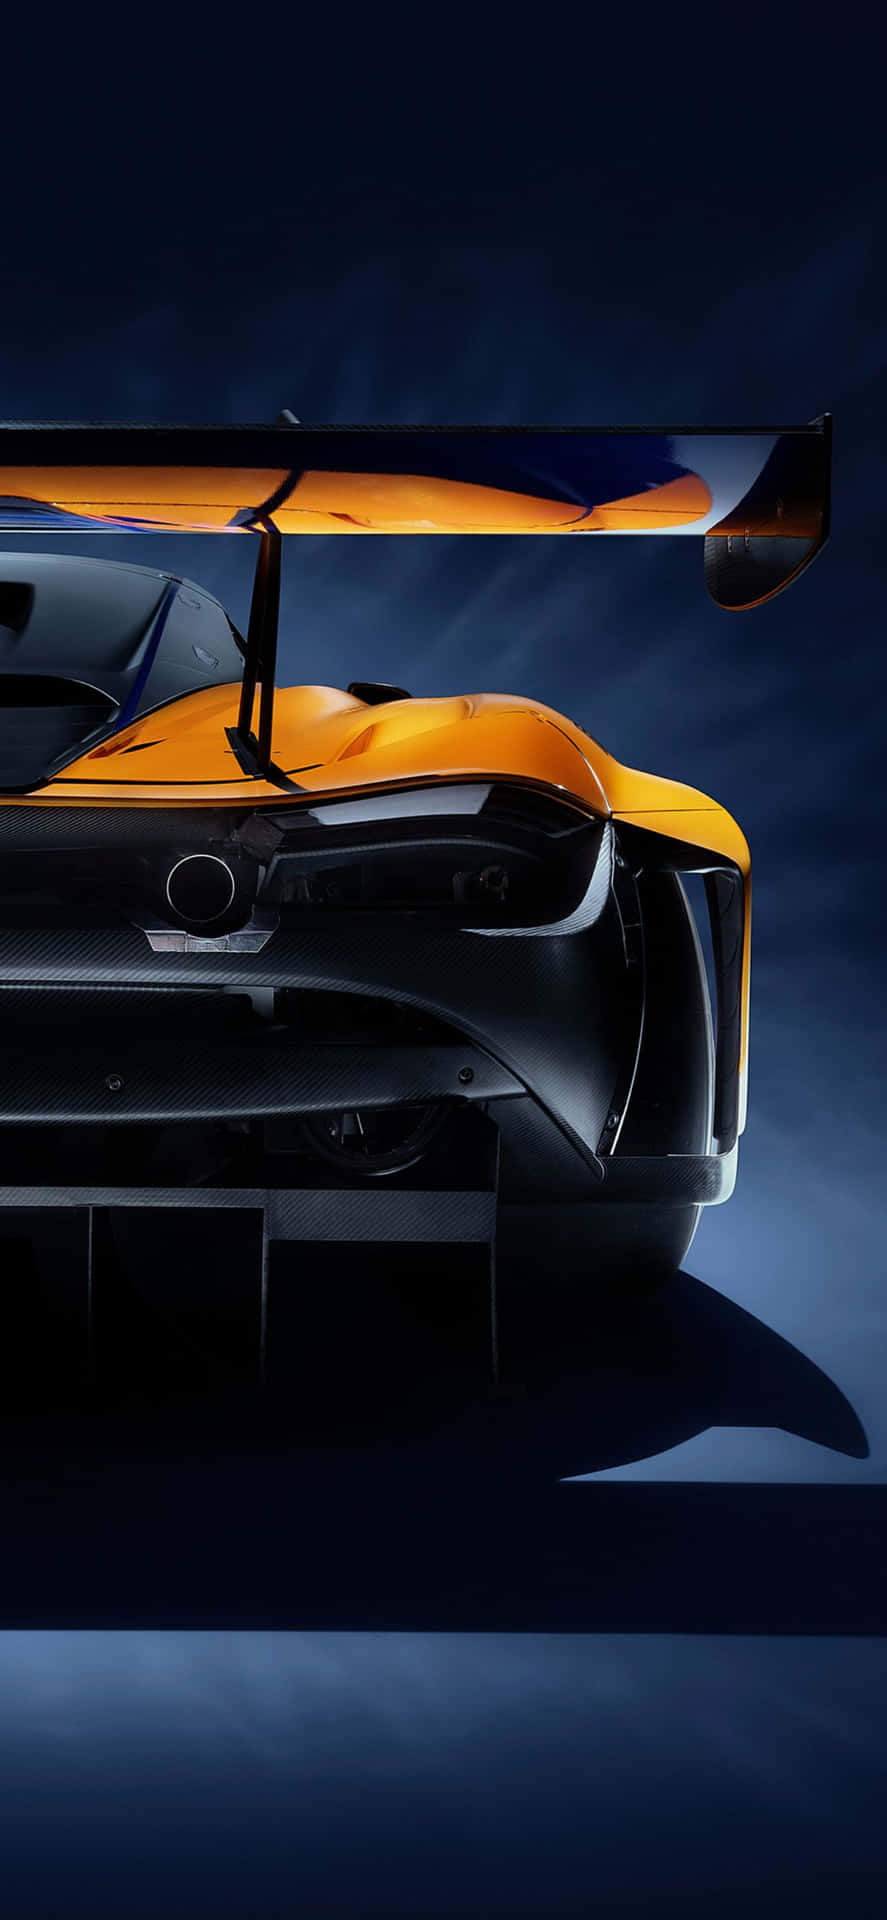 The Apple Iphone Xs Max alongside a Mclaren 720s sports car in an impressive background.